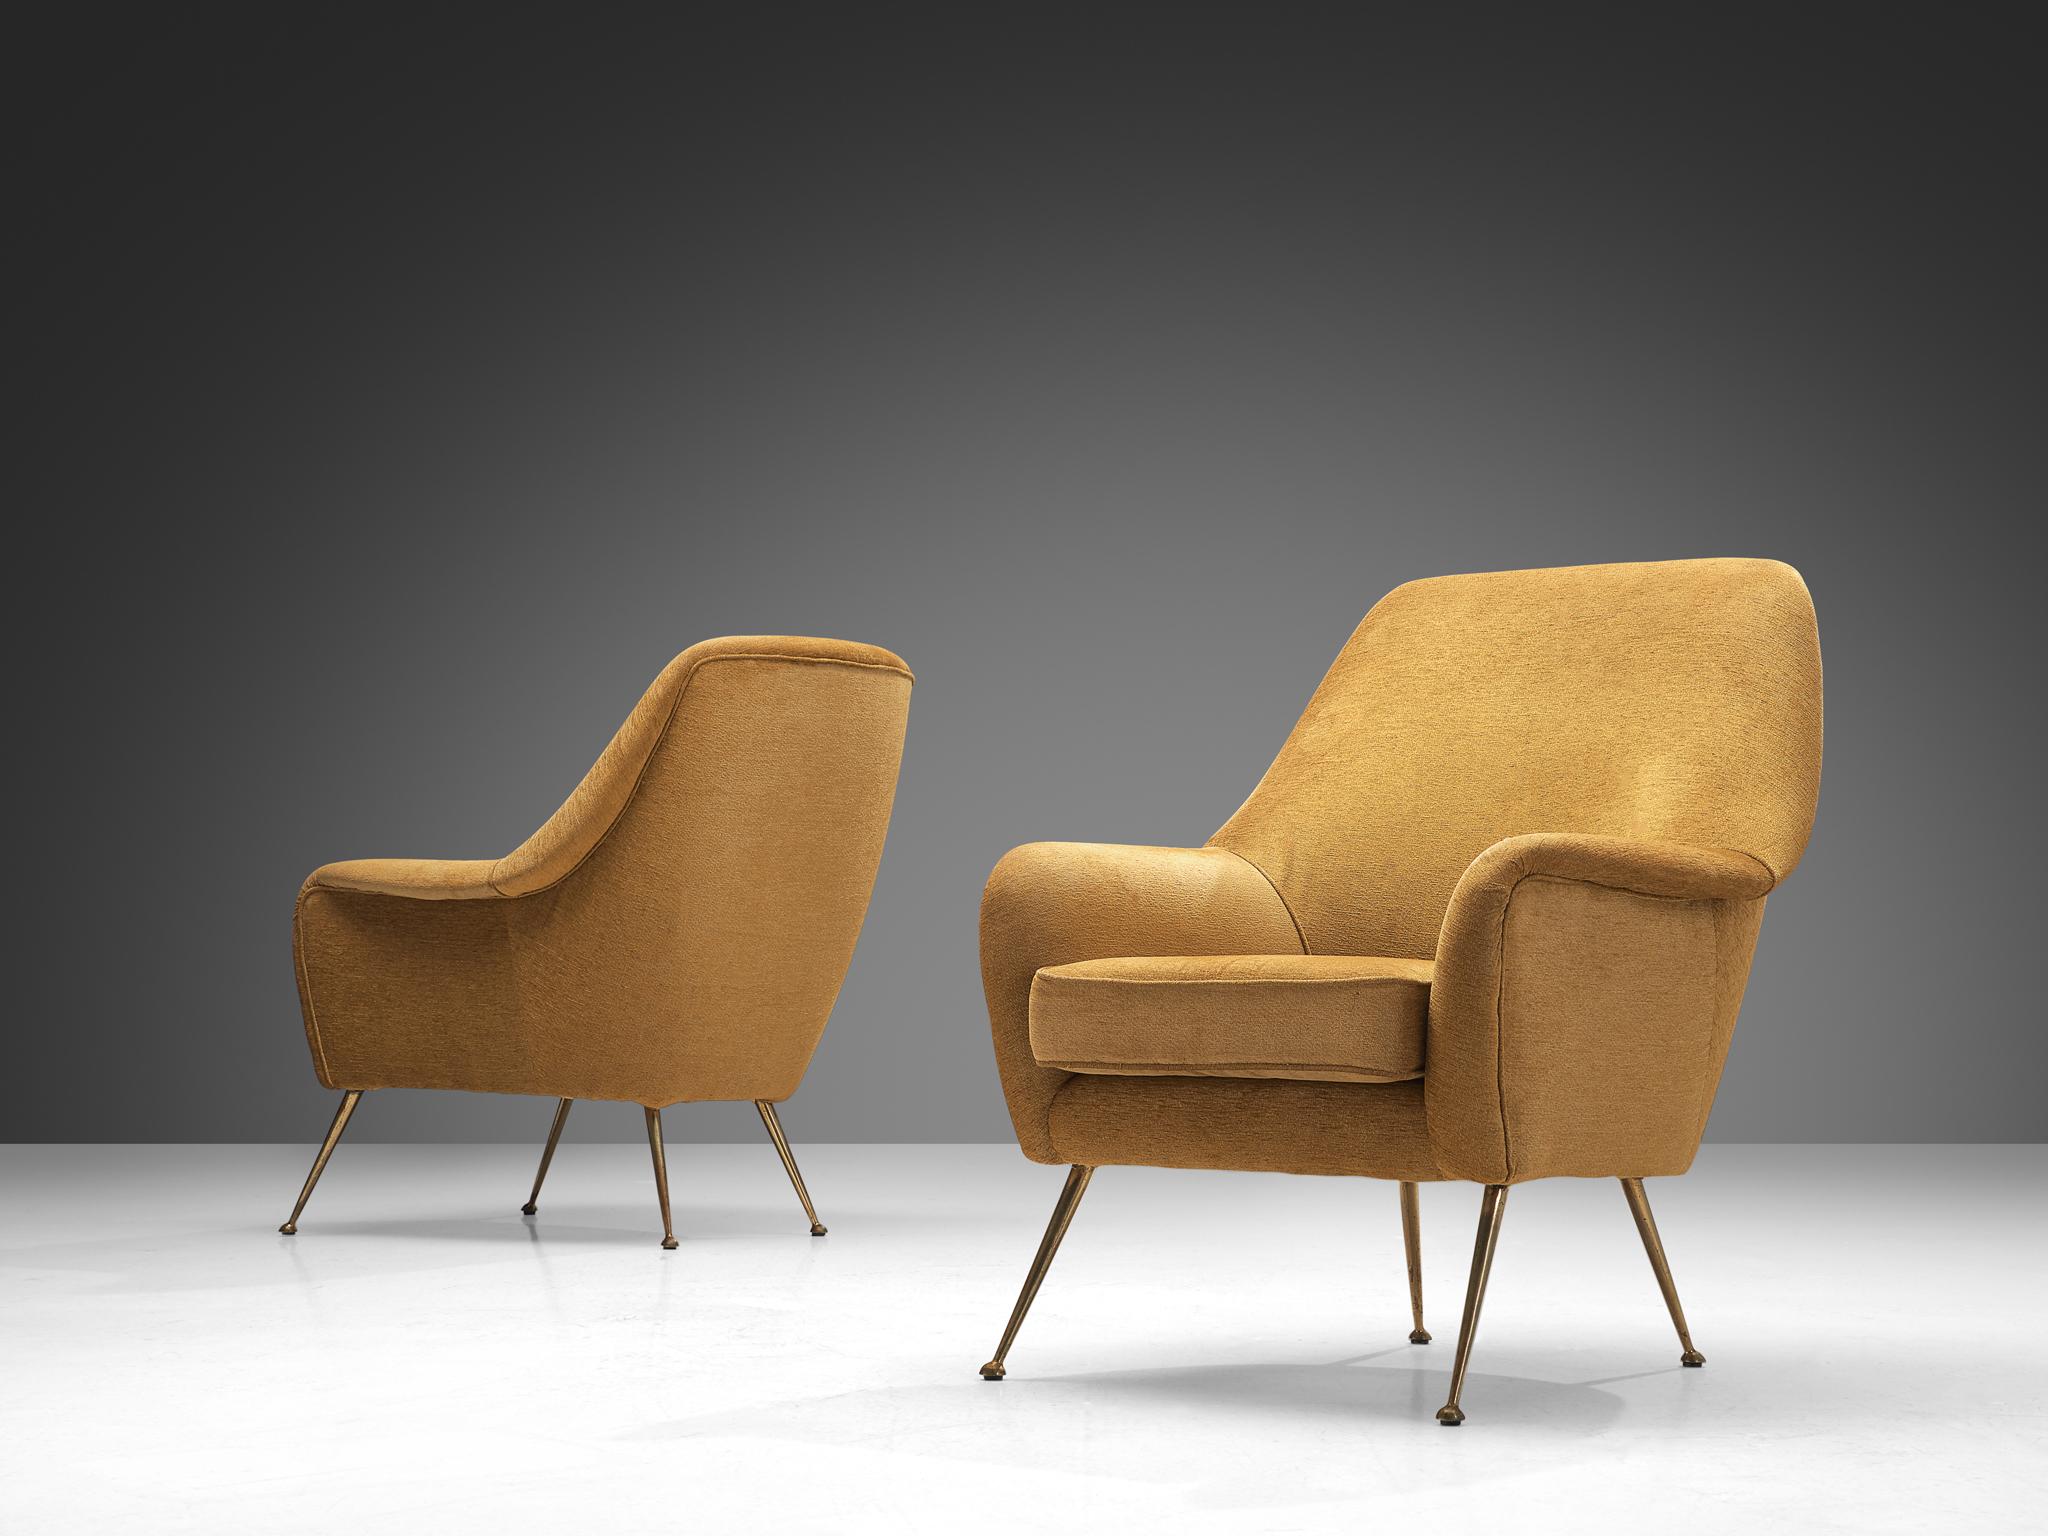 Pair of lounge chairs, fabric, brass, Italy, 1950s.

This Italian armchair is characterized by an elegant aesthetic due to its curvaceous lines and round edges. The seating area is supported by sleek outward-facing legs in brass. The back elegantly